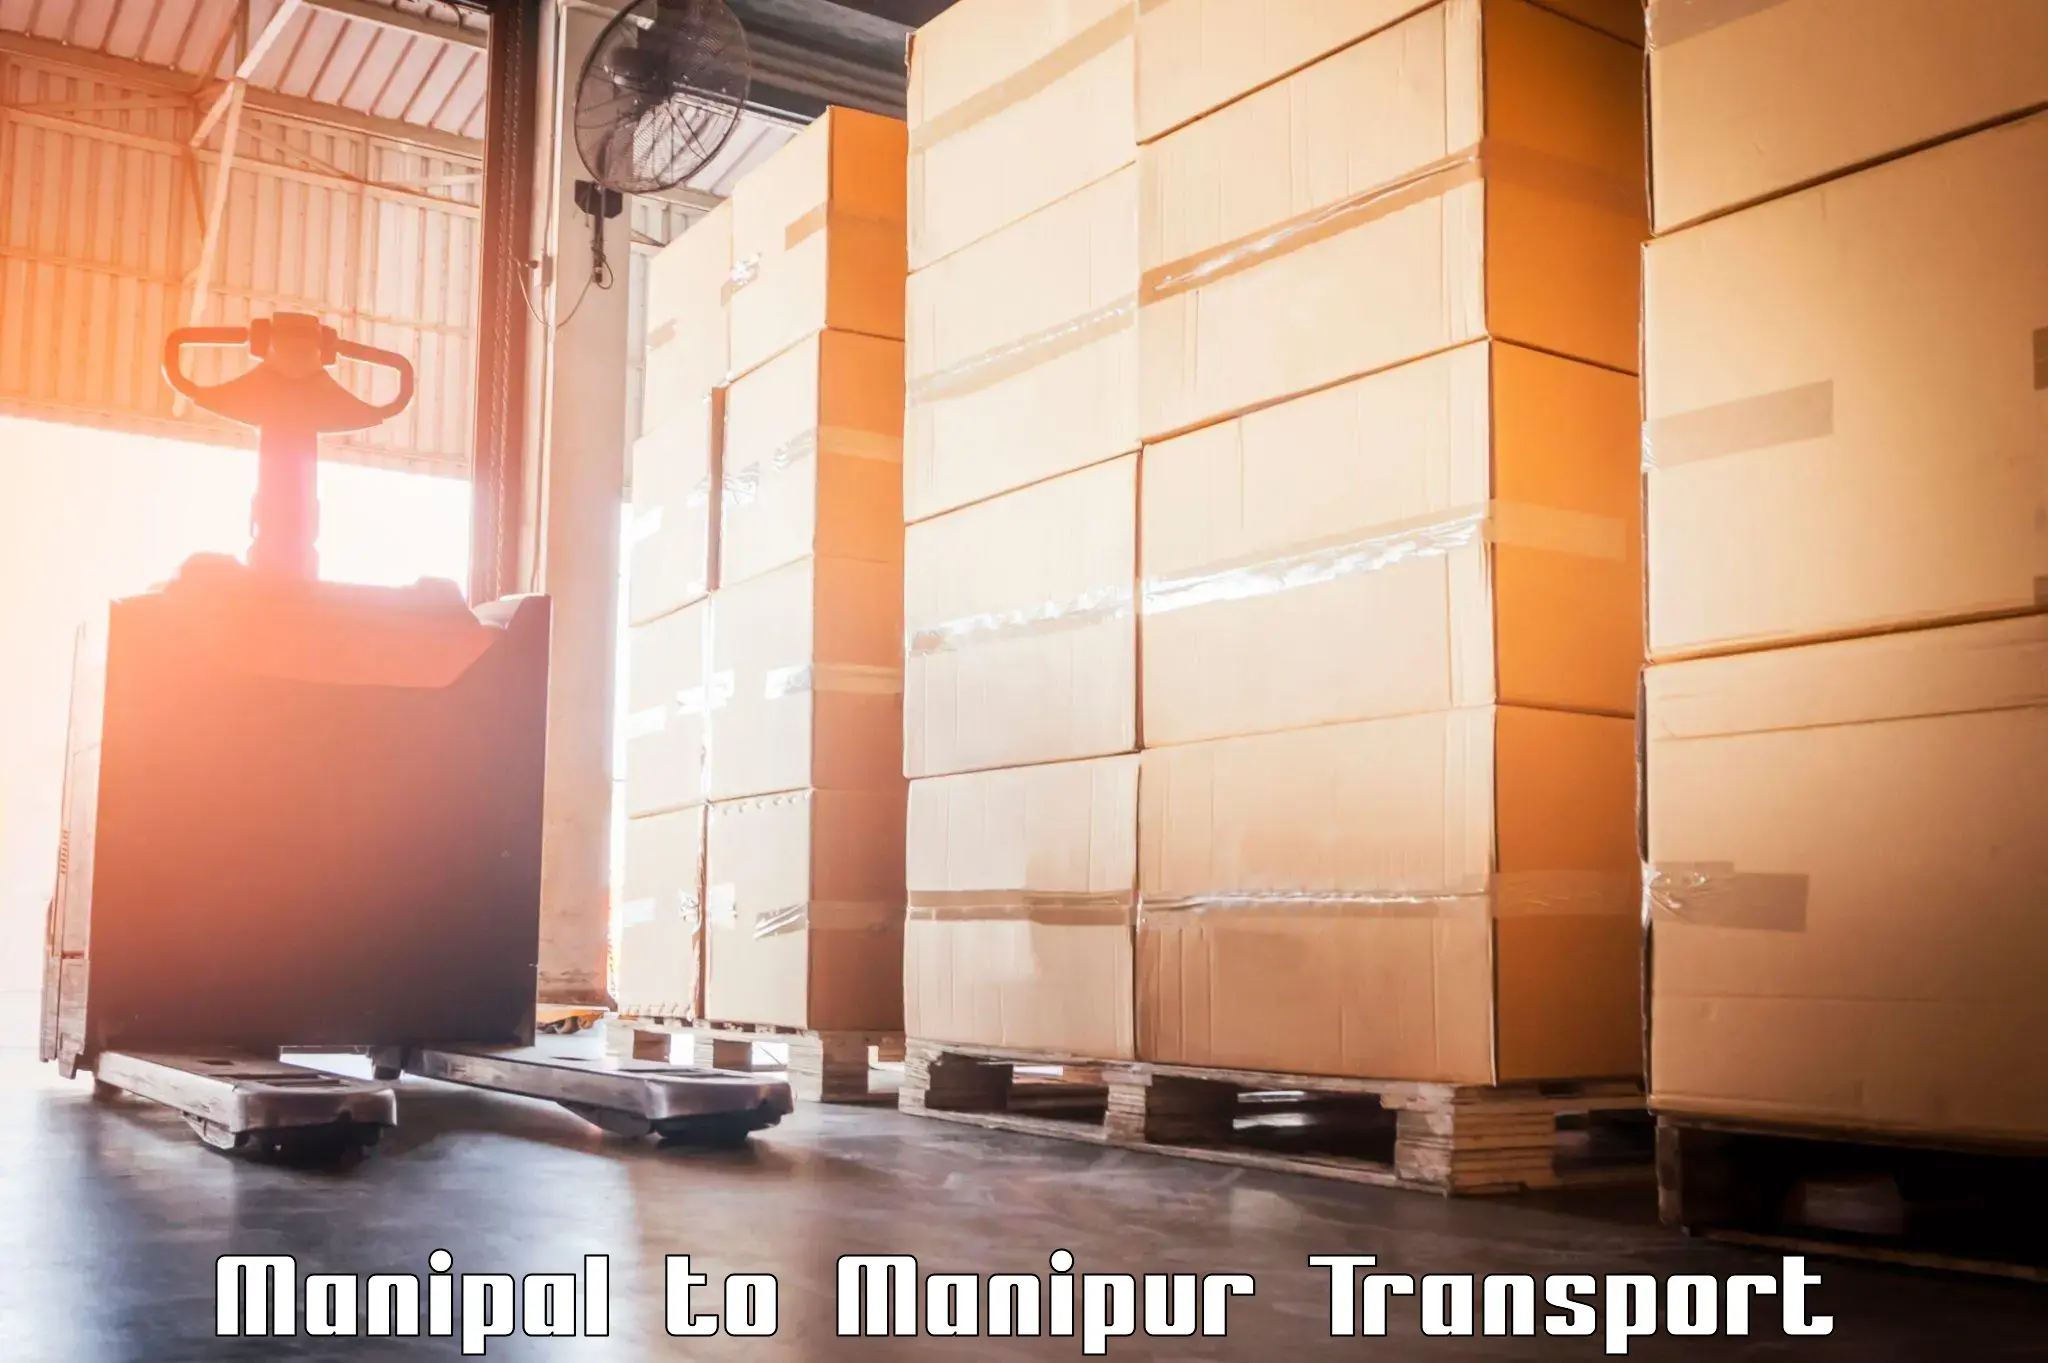 Shipping partner Manipal to Manipur